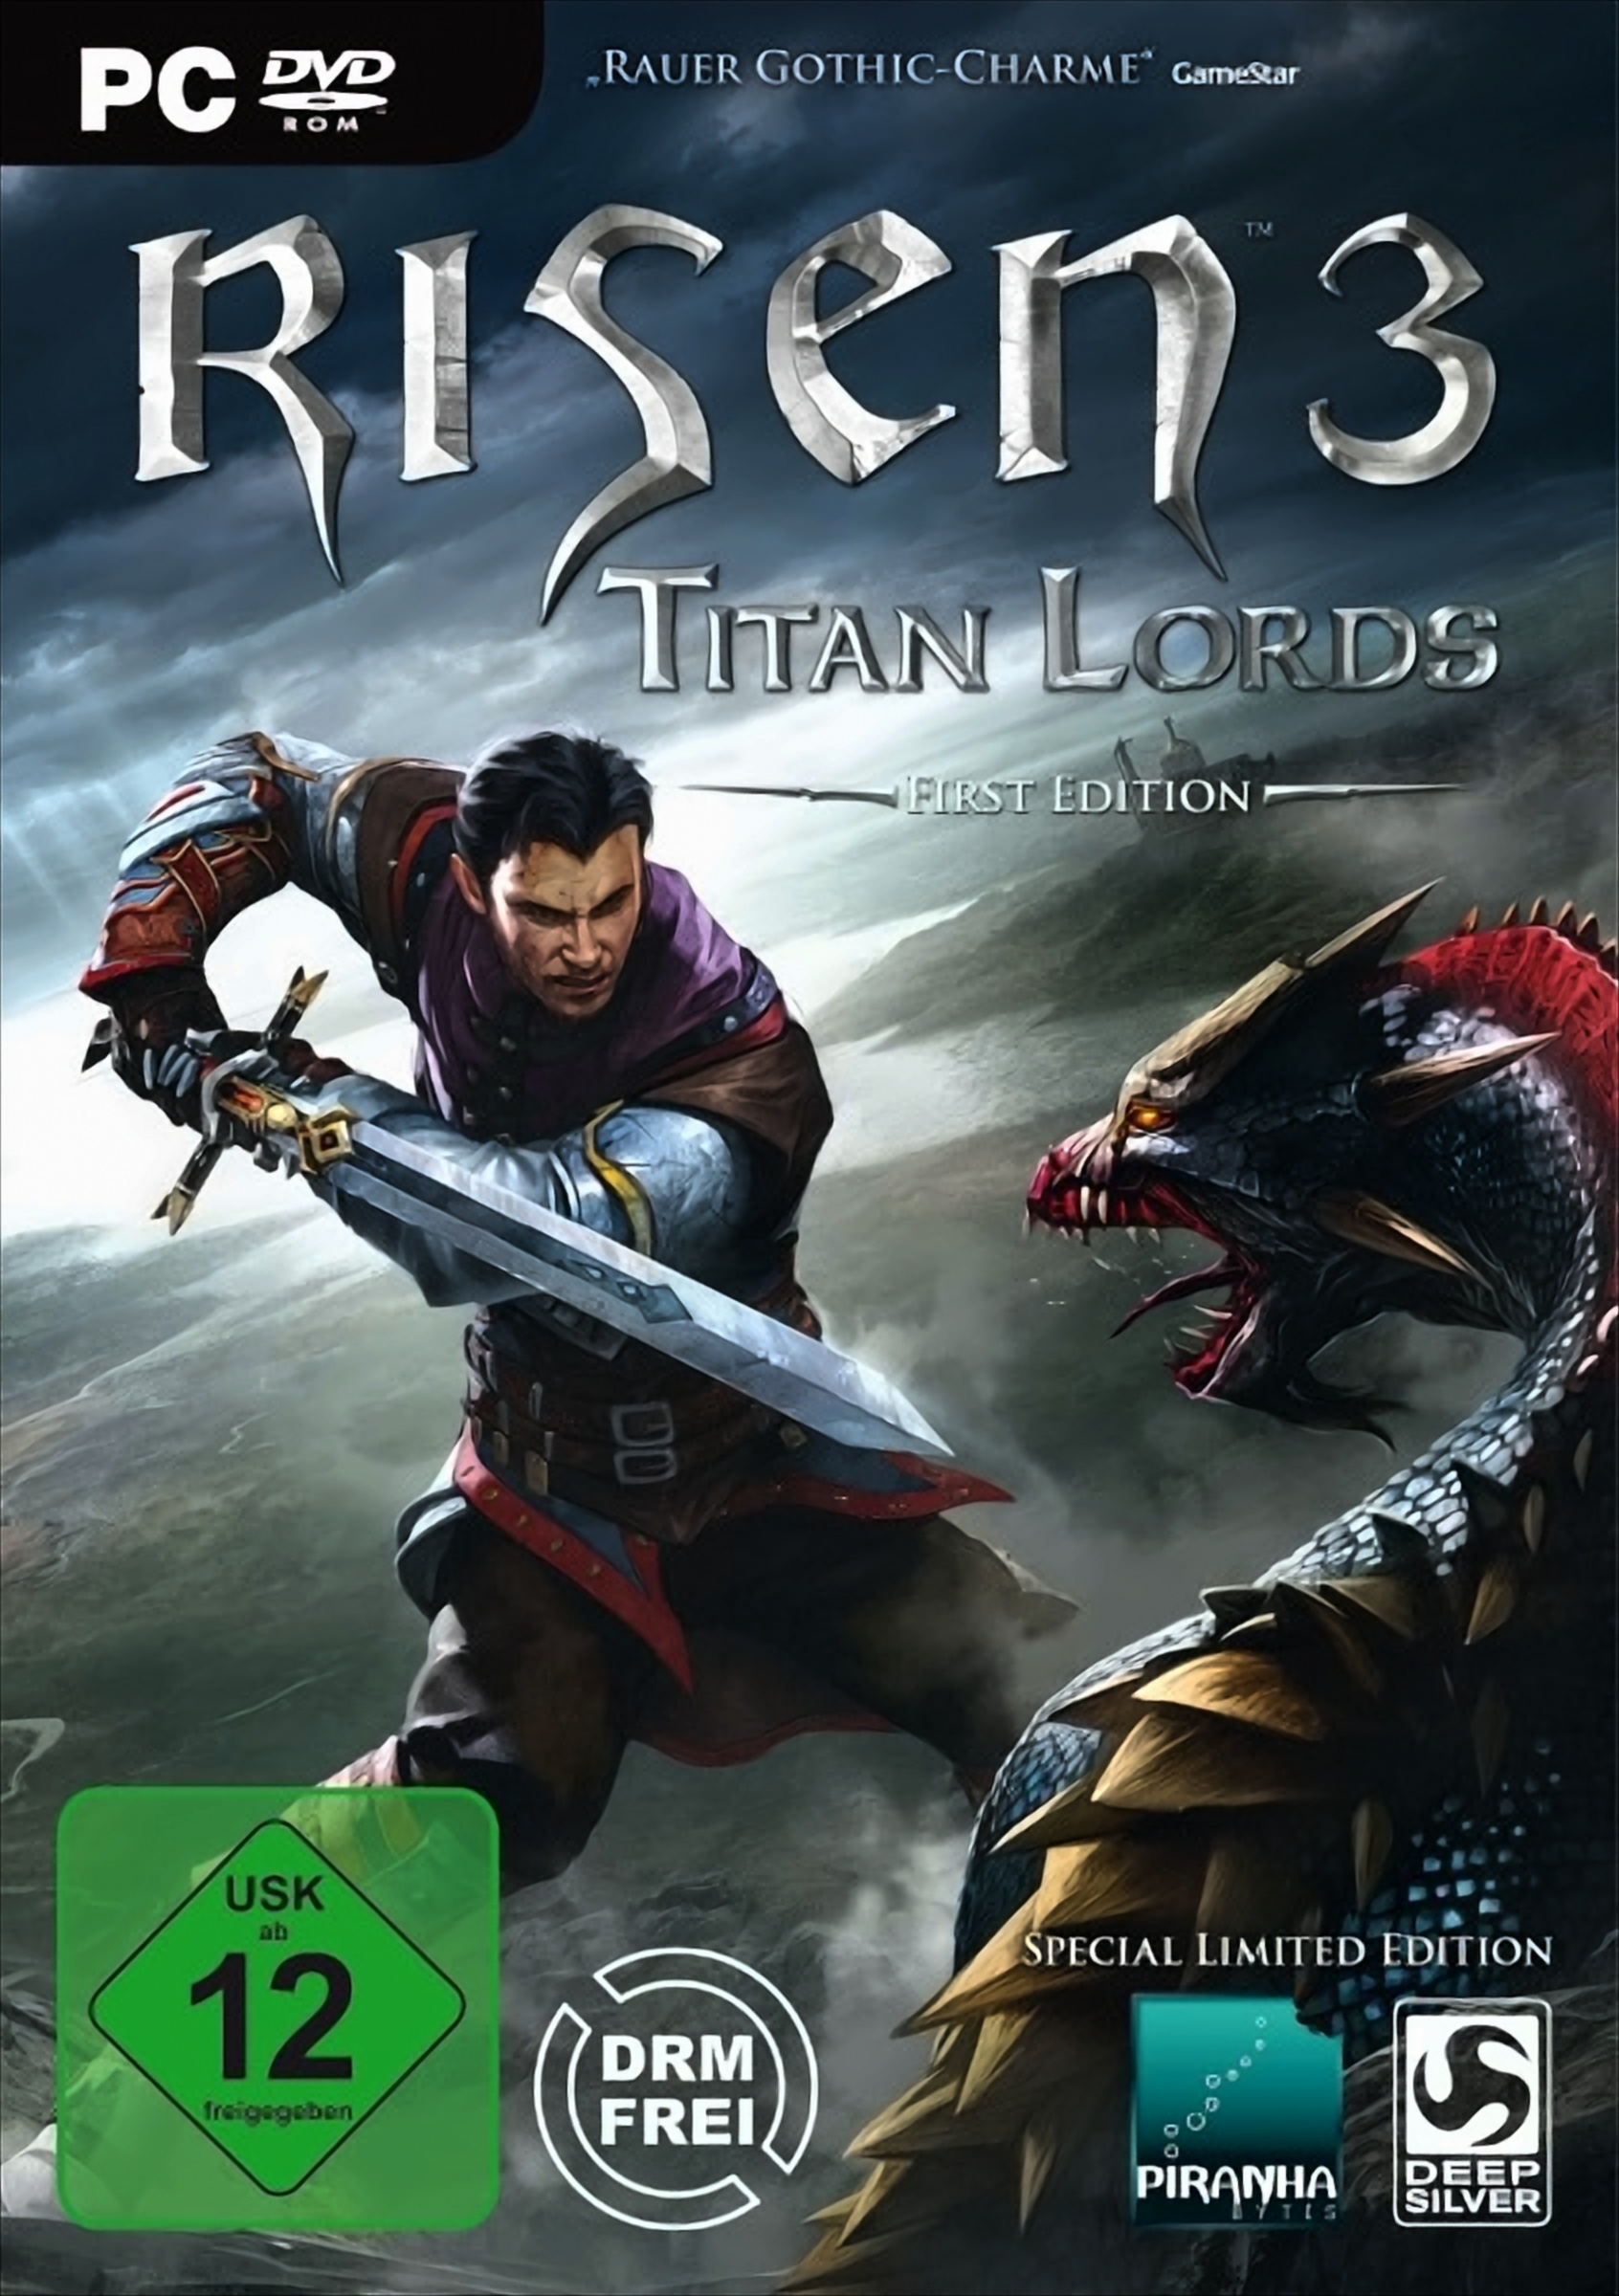 Special (USK) - (PC) 3: Edition Lords Limited [PC] Risen Titan